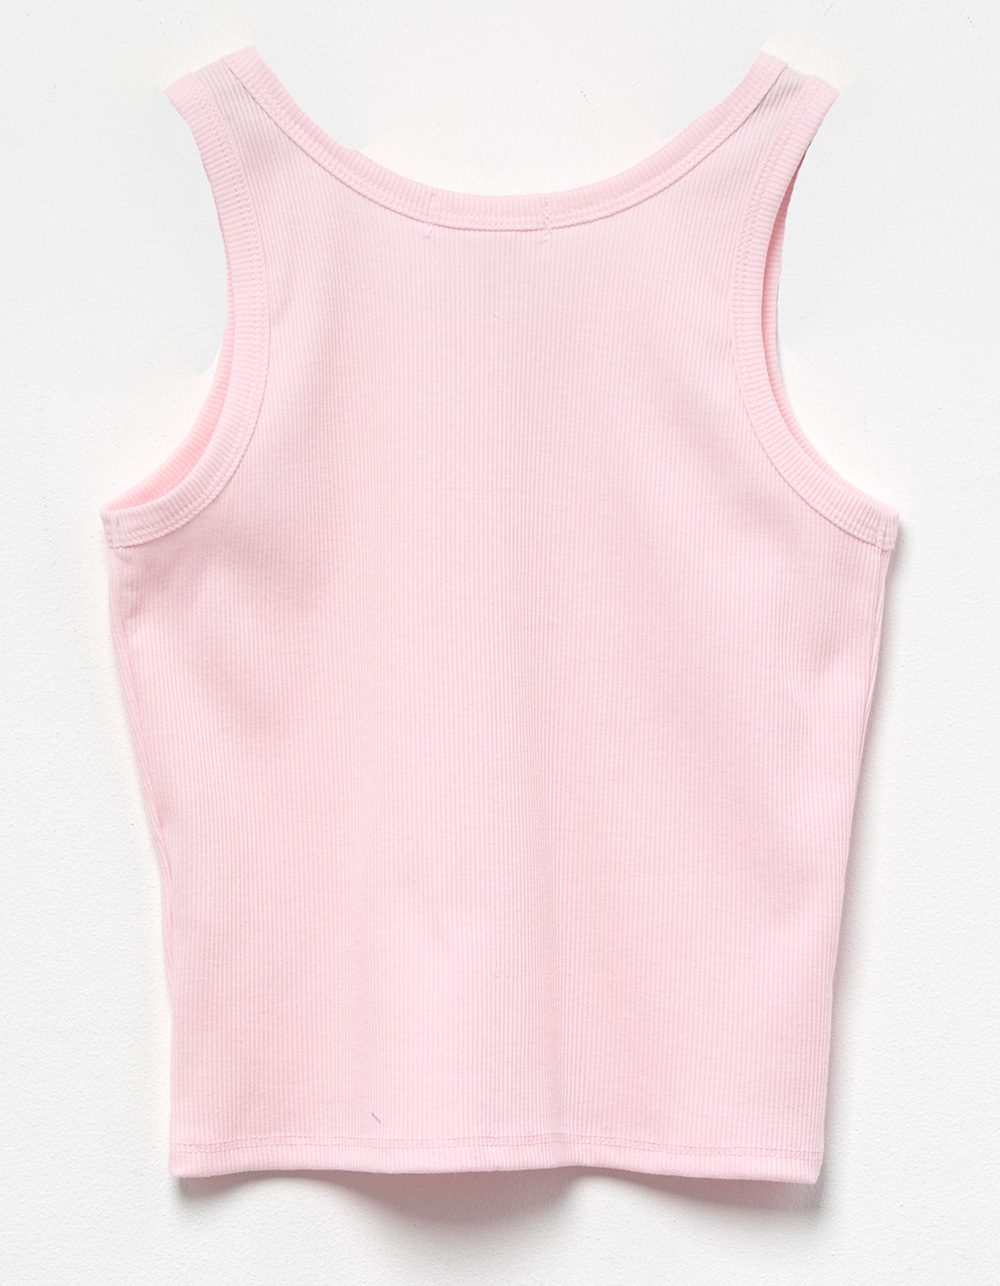 adviicd Tank Tops For Teen Girls Tops for Women Tank Tops Ribbed